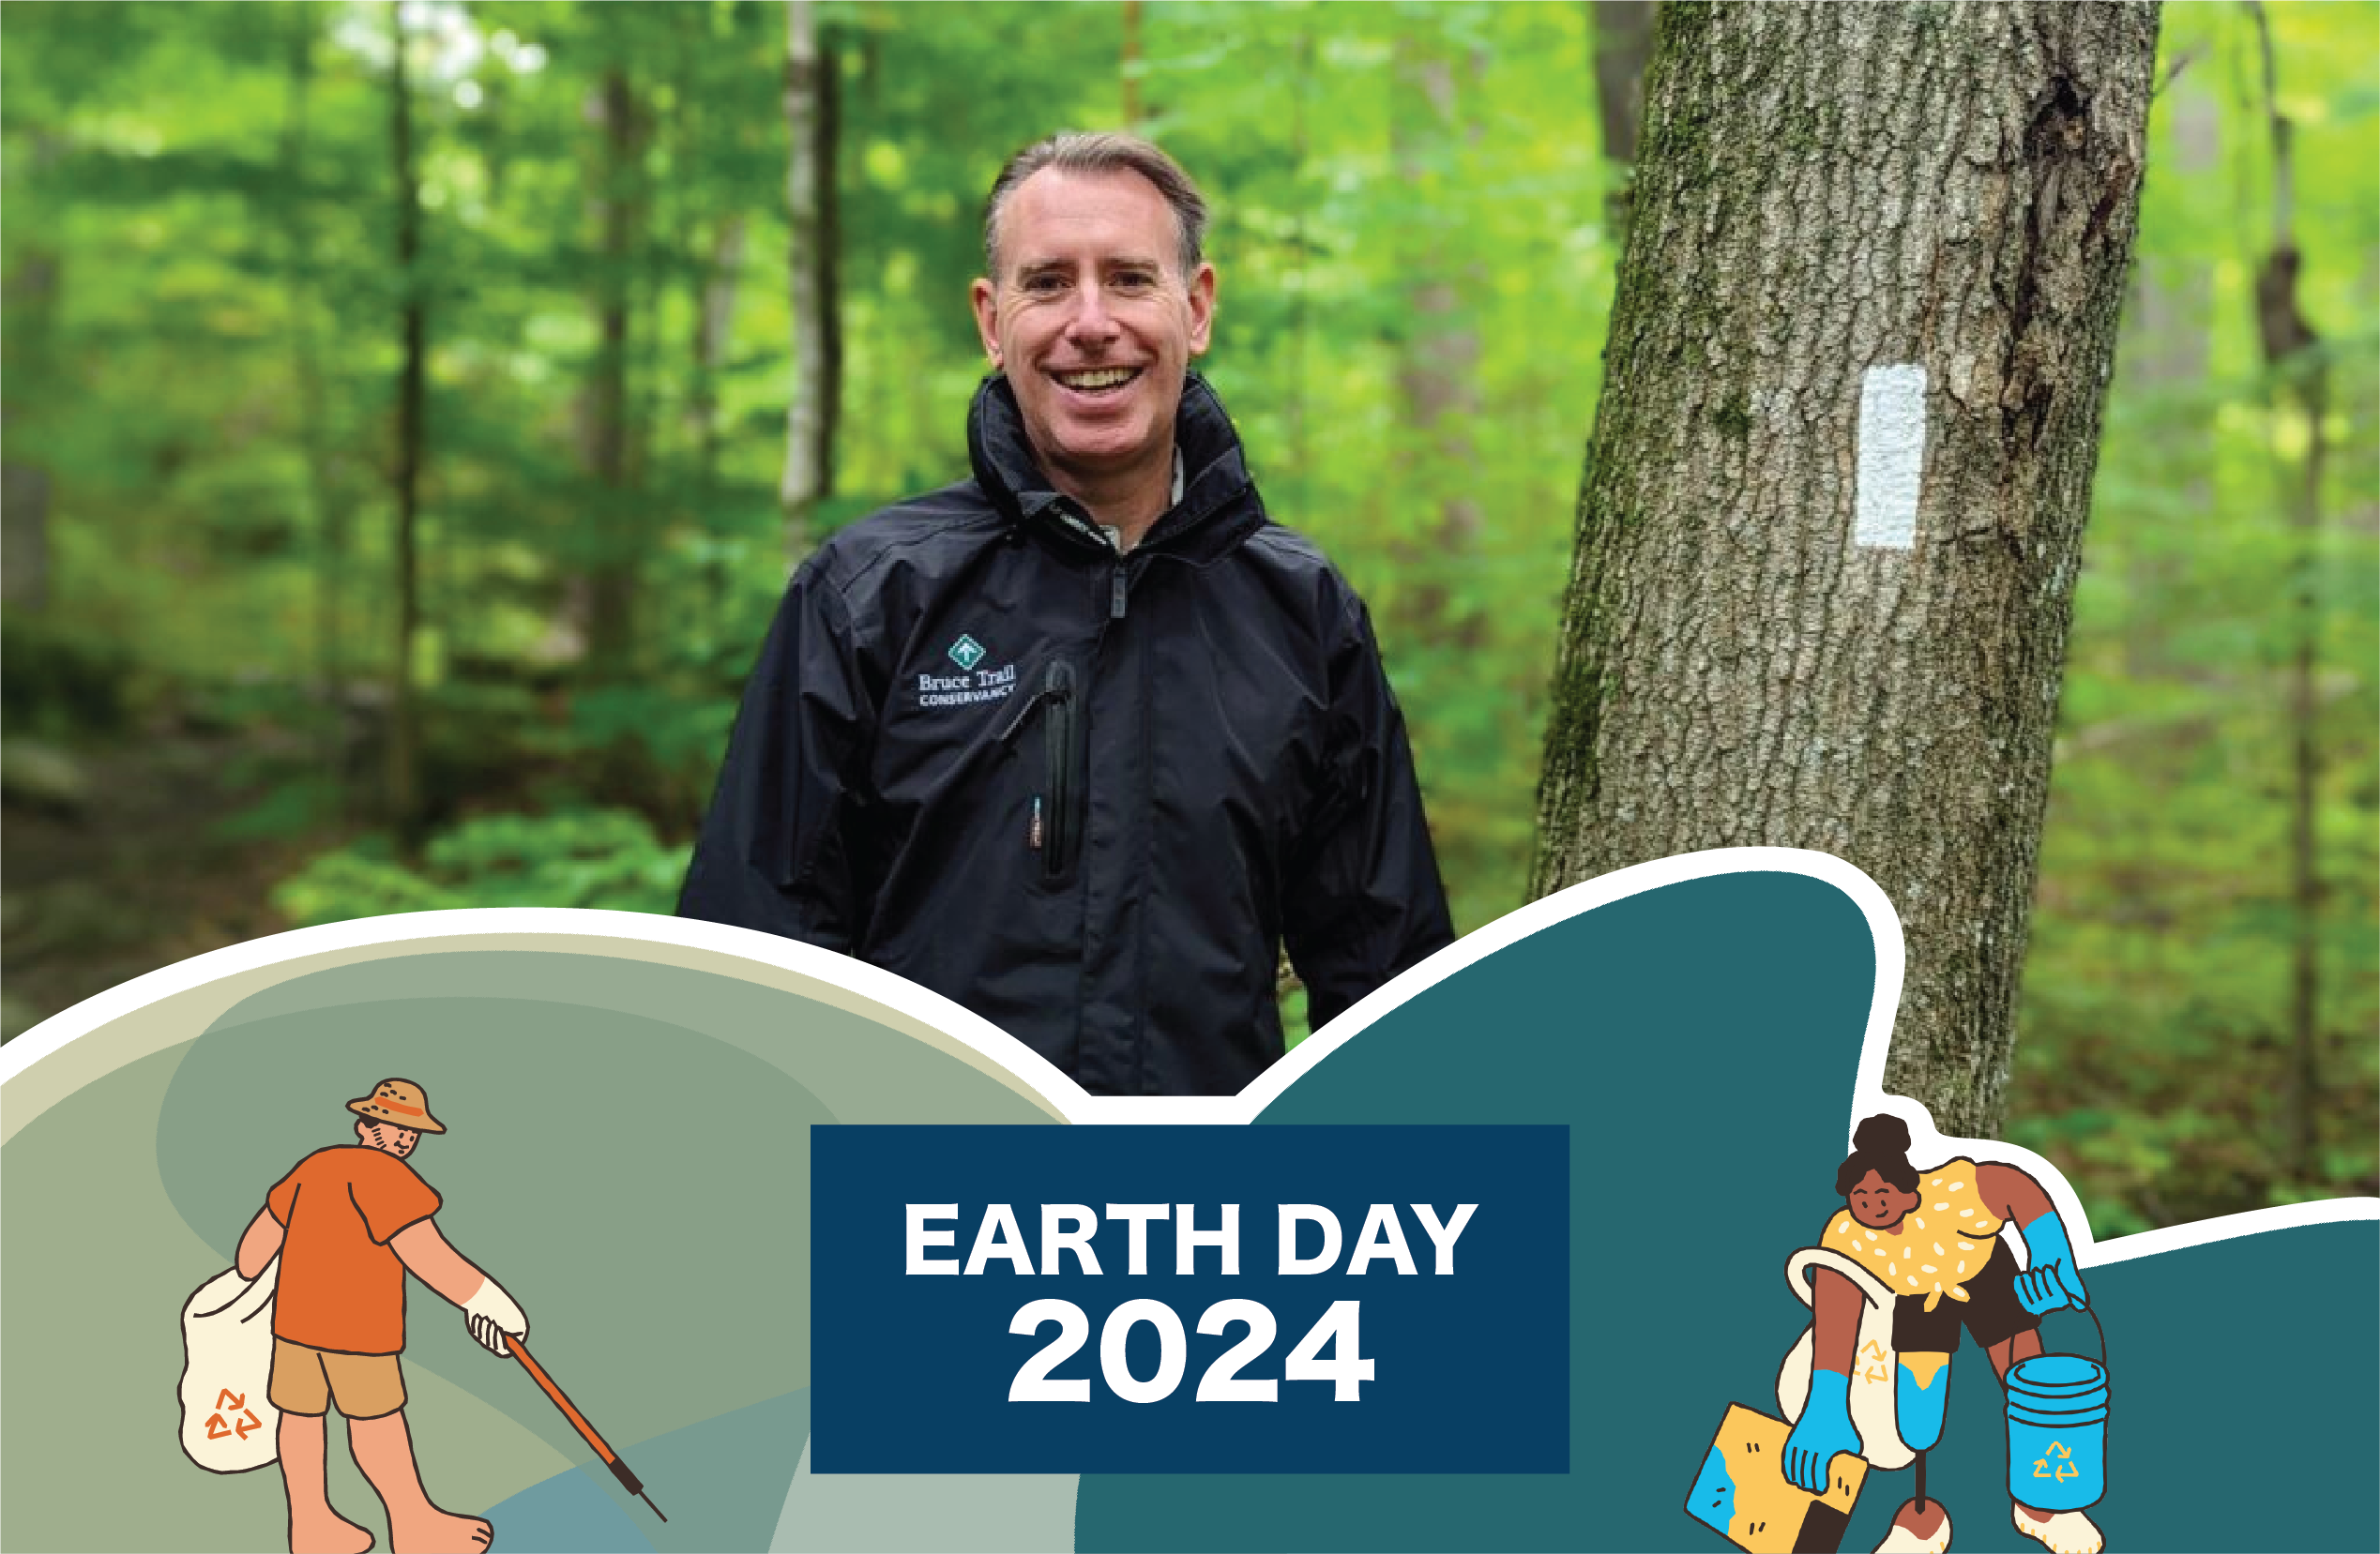 Man in forest beside tree with white trail marker and Earth Day 2024 graphic